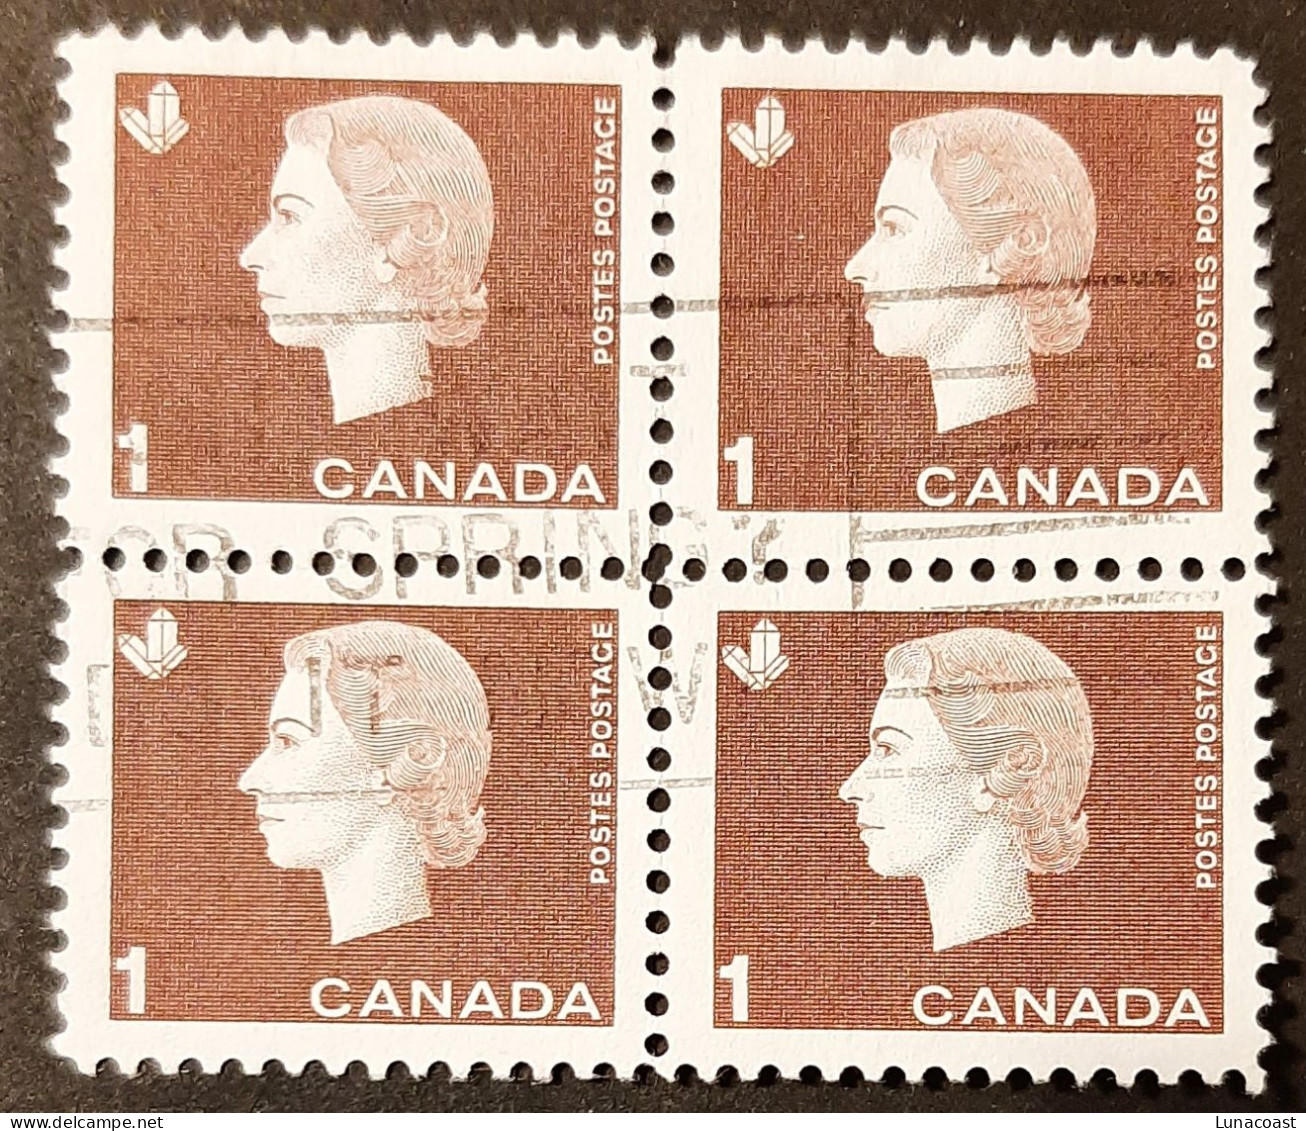 Canada 1962  USED  Sc 401    1c Block, Queen Elisabeth Cameo Issue - Used Stamps